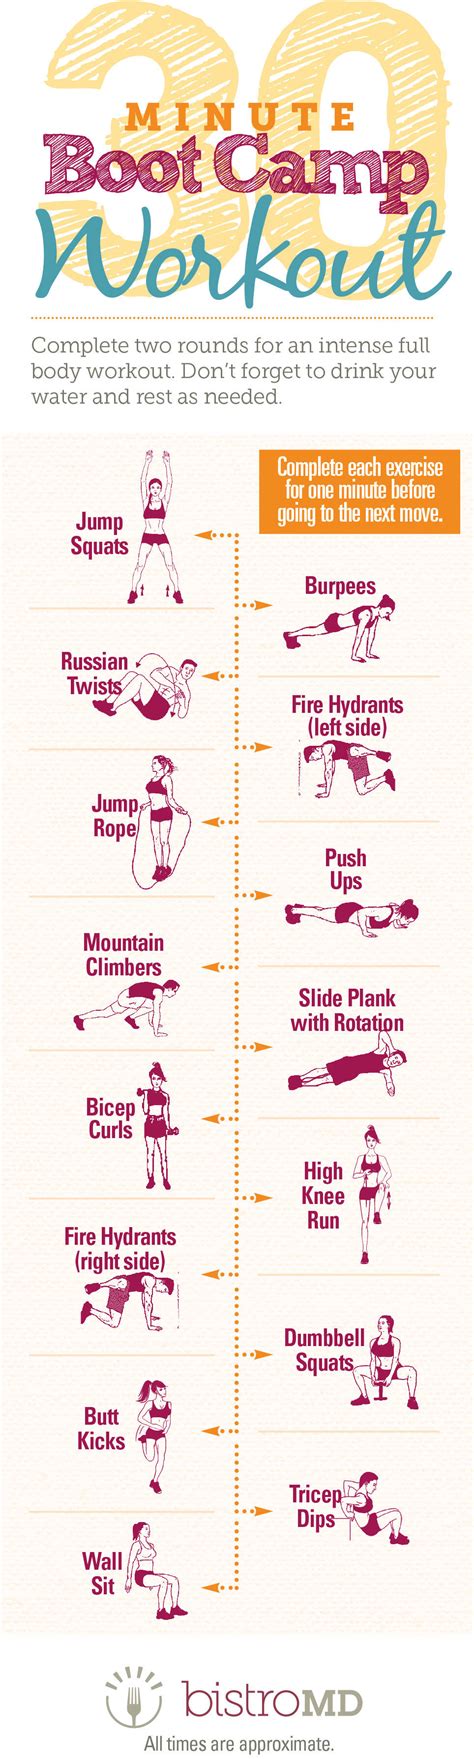 30 Minute Boot Camp Workout Pictures Photos And Images For Facebook